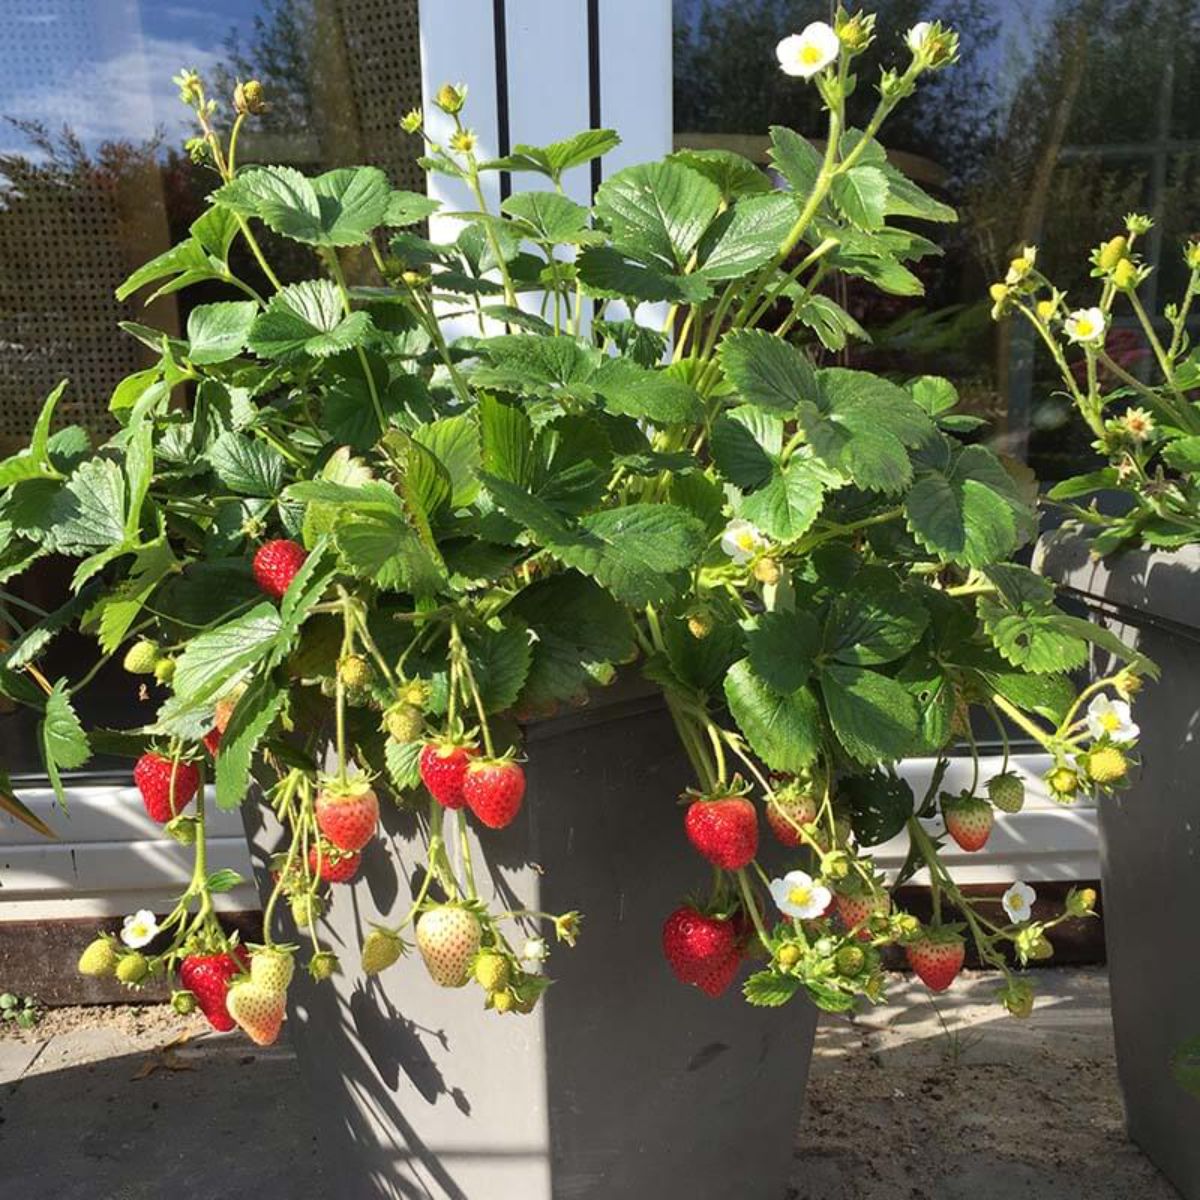 Delizz strawberry plant with ripe and unripe fruits growing in a pot.